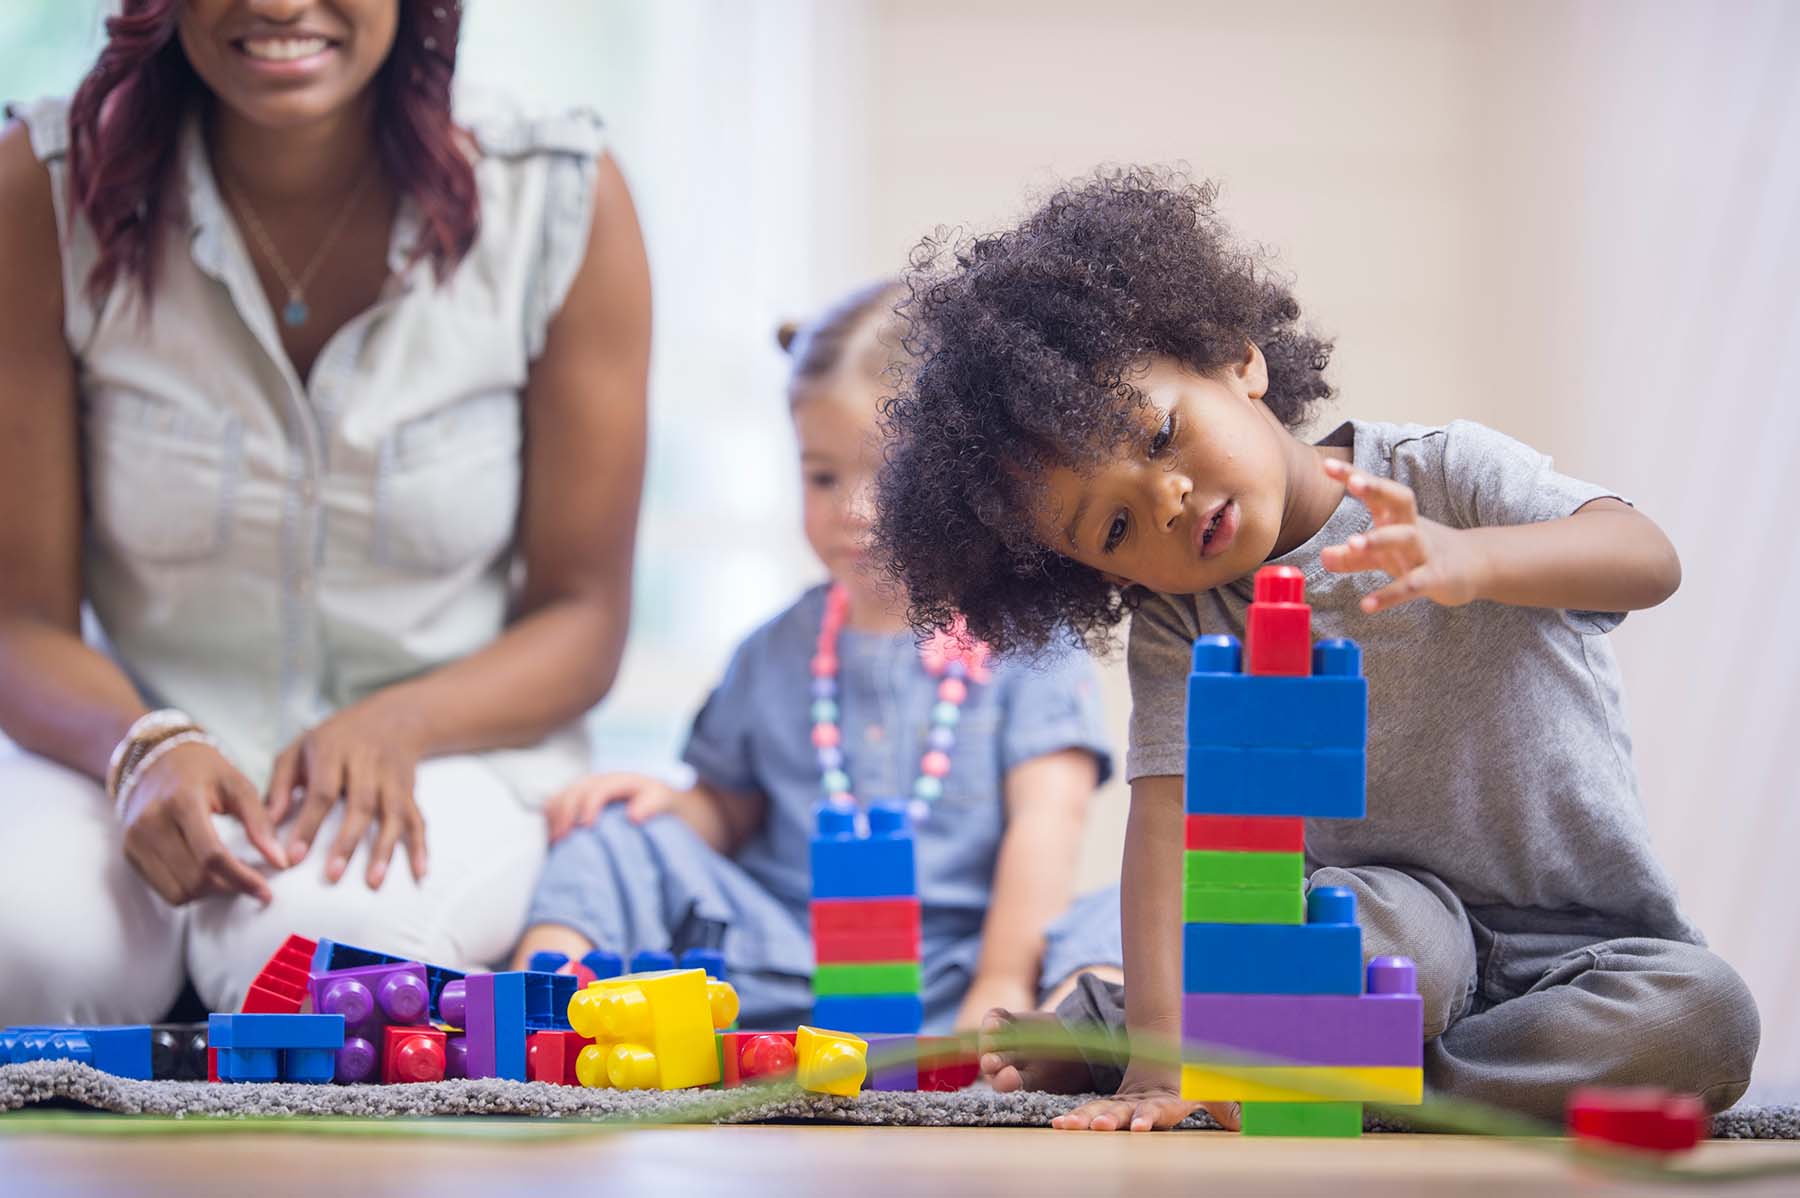 Young Black boy focuses on building blocks with mom and young girl in the background.